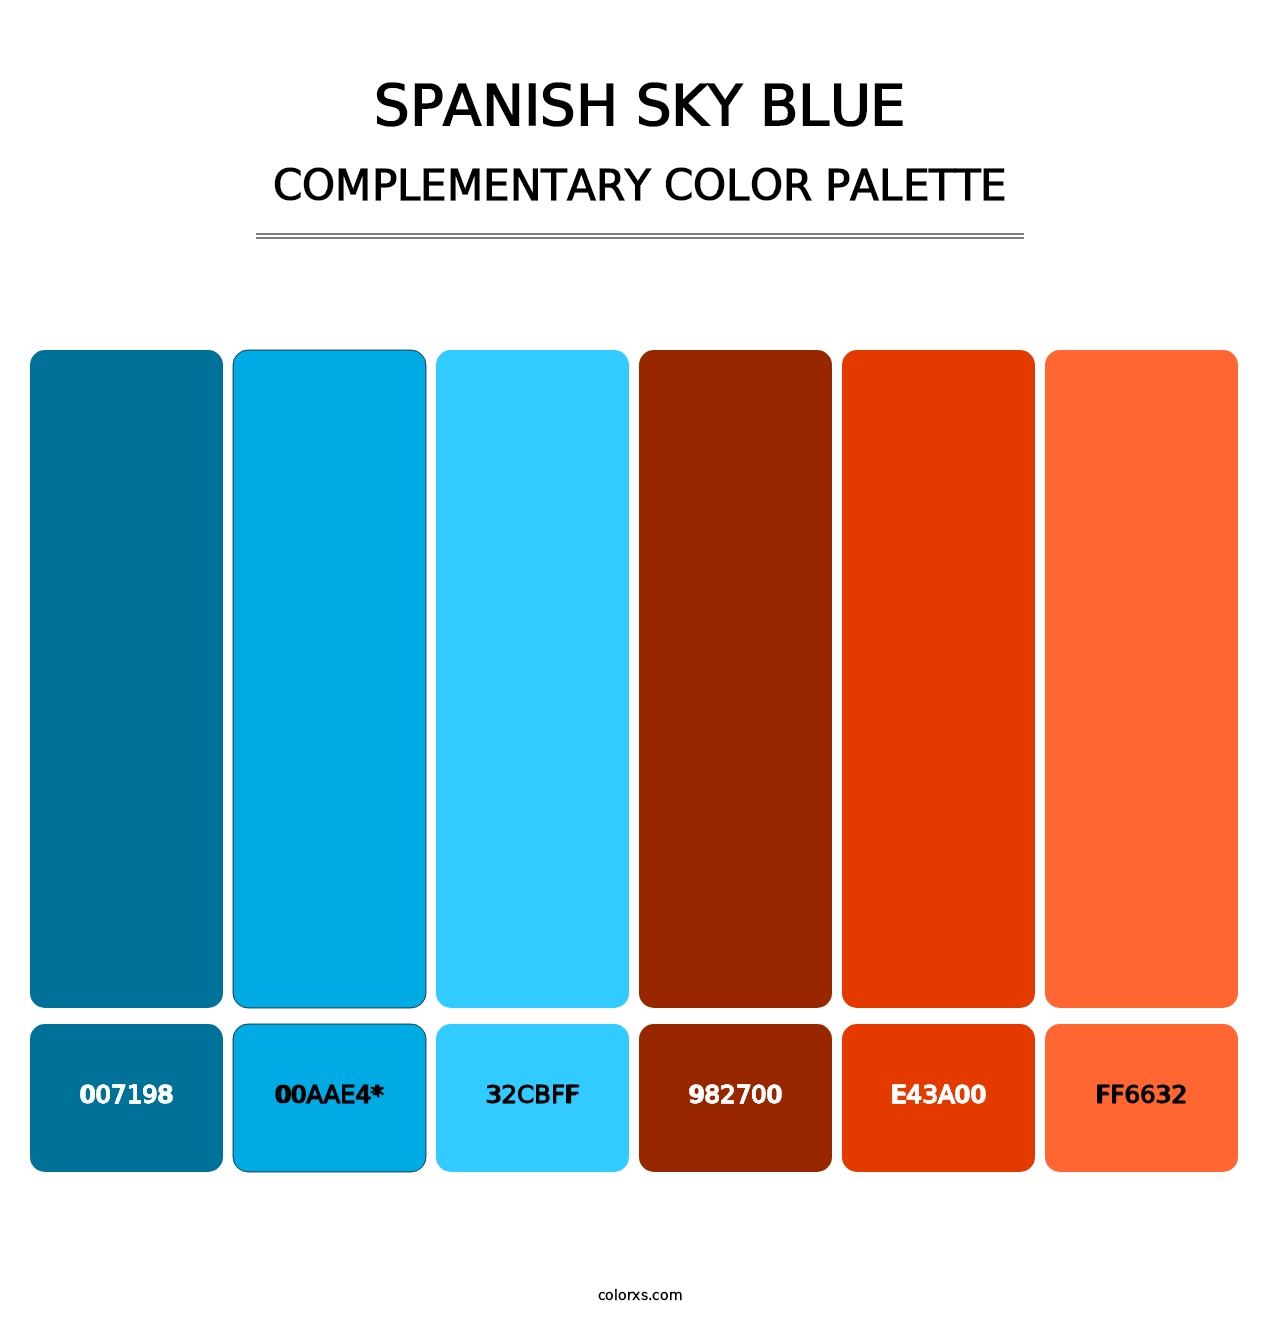 Spanish Sky Blue - Complementary Color Palette